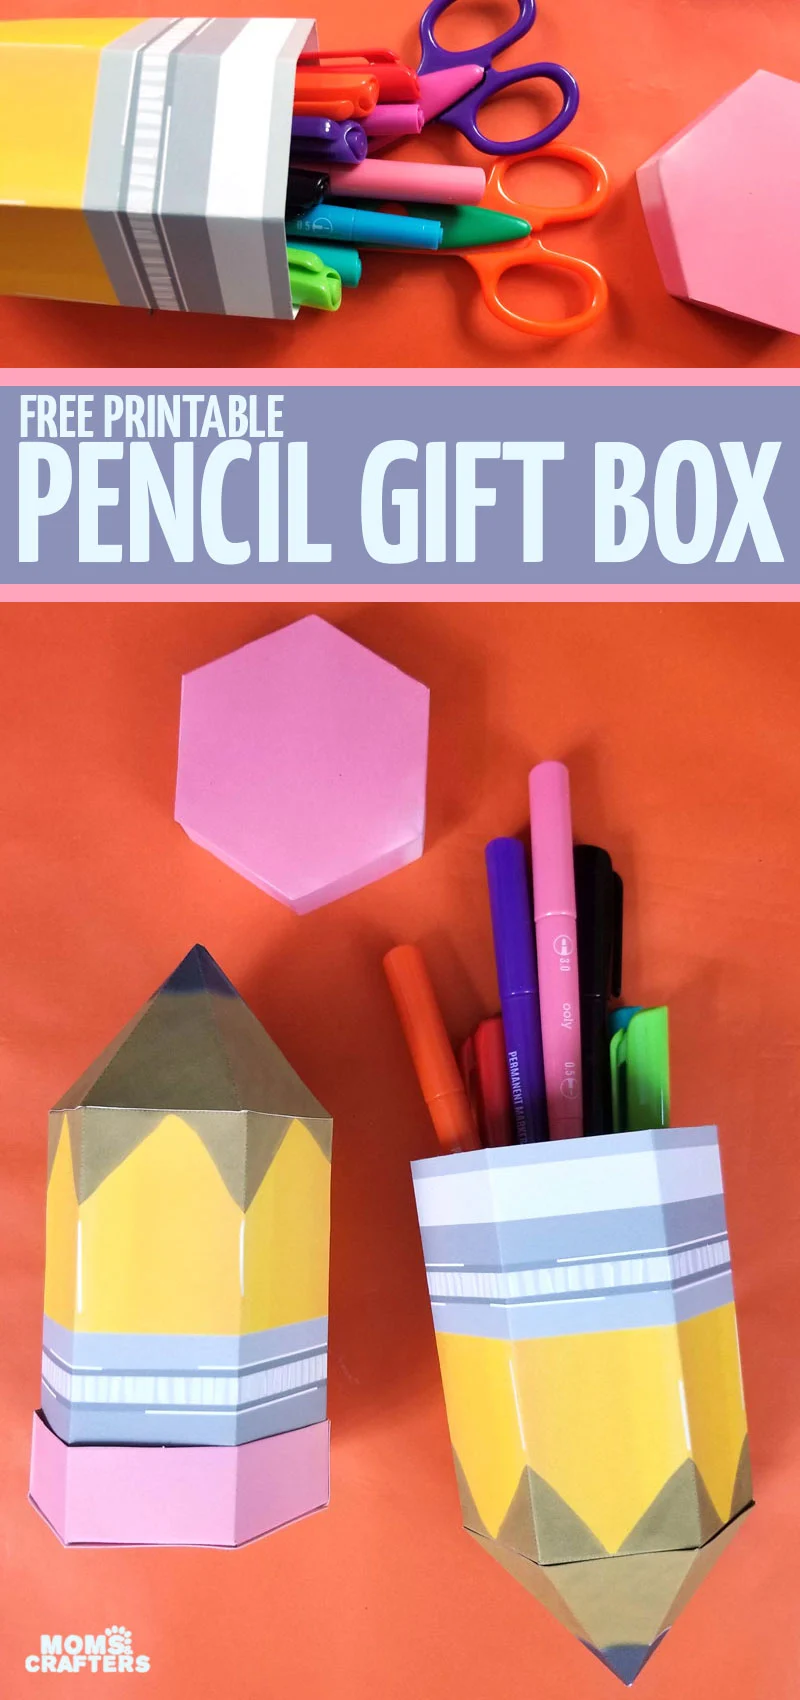 CLick for a free printable pencil box template! This can be great as DIY school supplies or a back to school treat - or even a party favor for an art themed party!